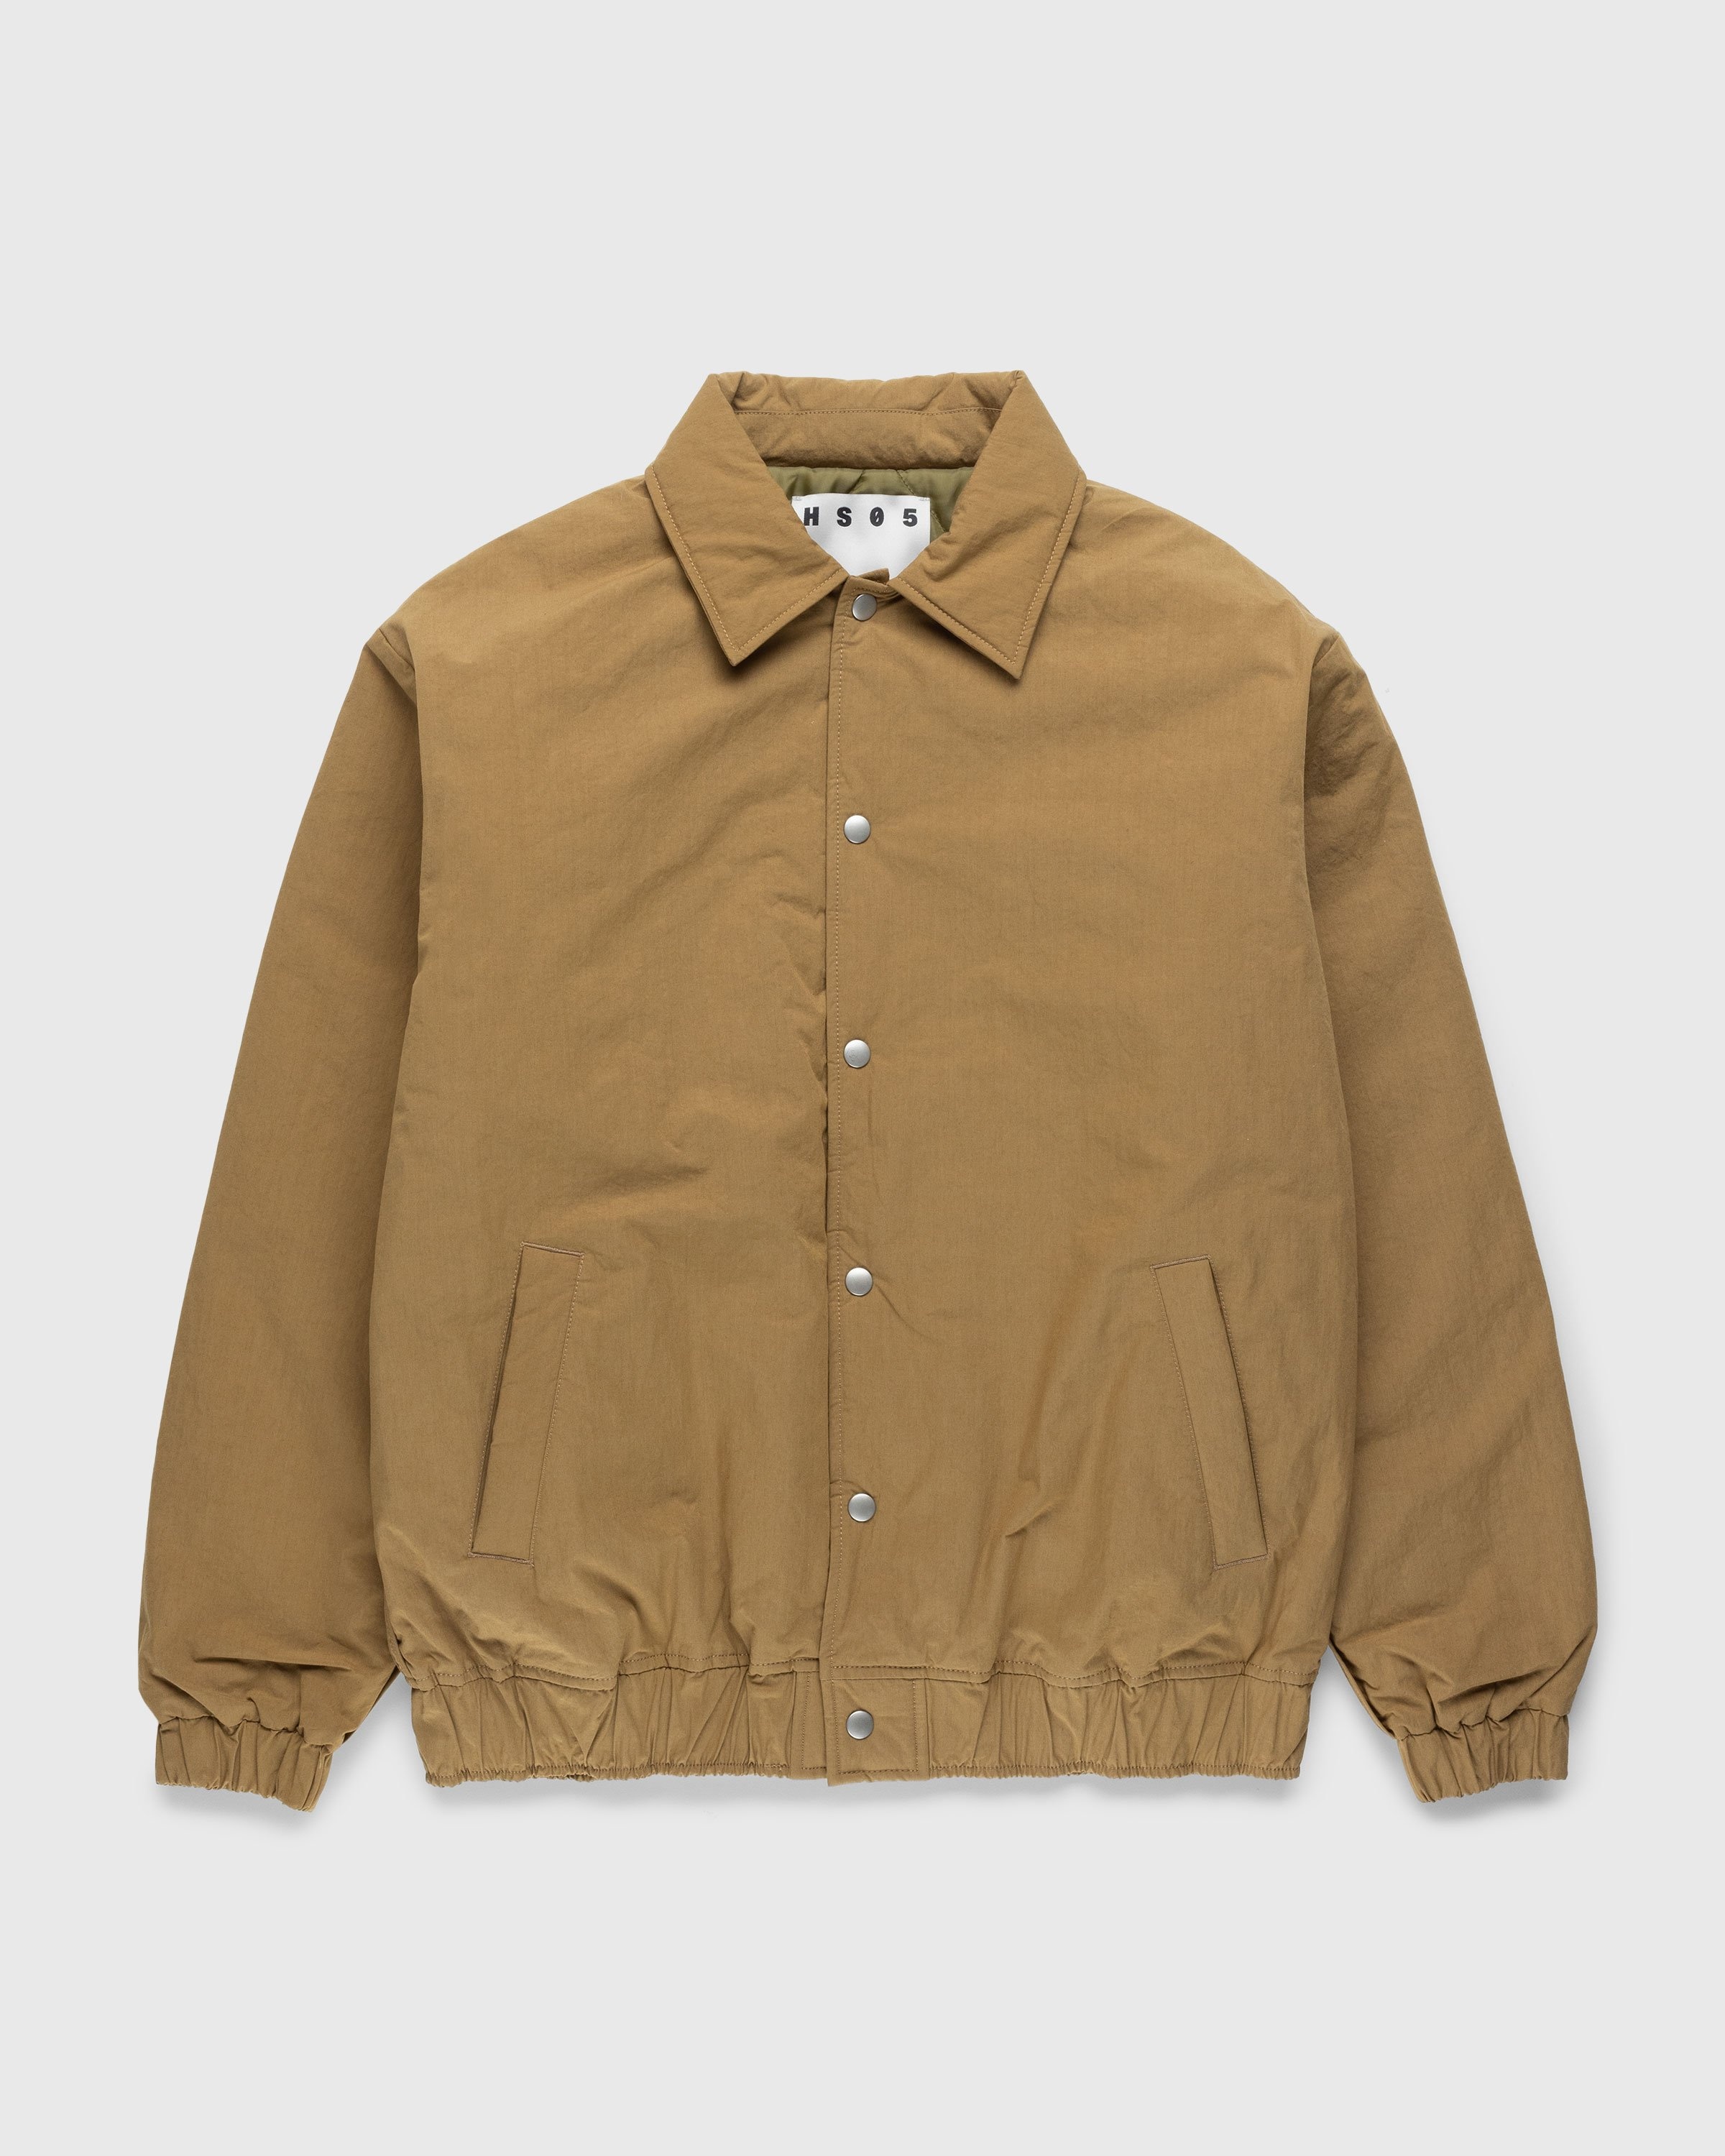 Highsnobiety HS05 – Reverse Piping Insulated Jacket Beige - Outerwear - Beige - Image 1